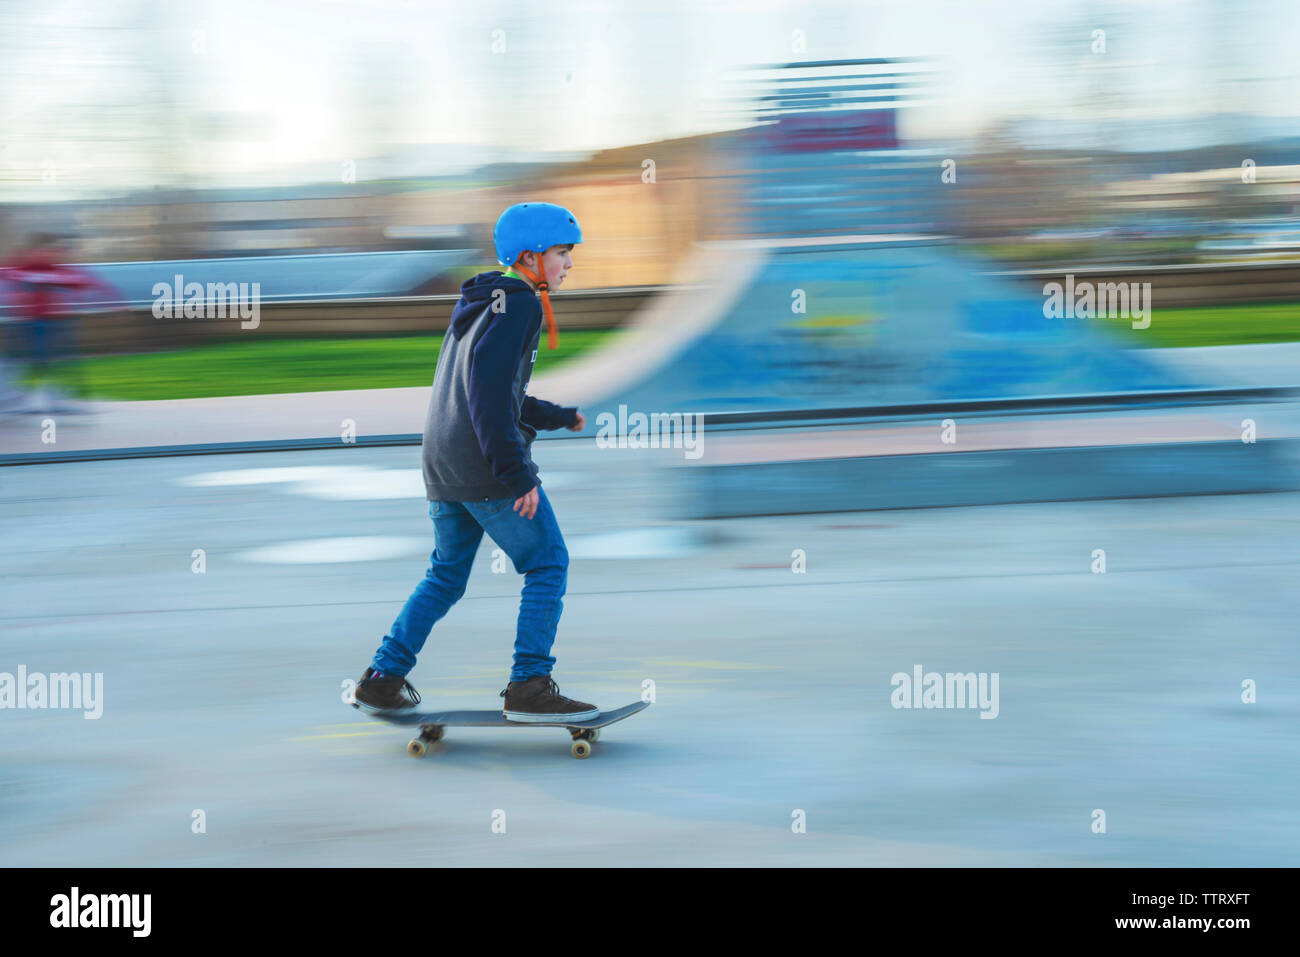 Side view of young skater wearing blue helmet in motion at skatepark Stock Photo